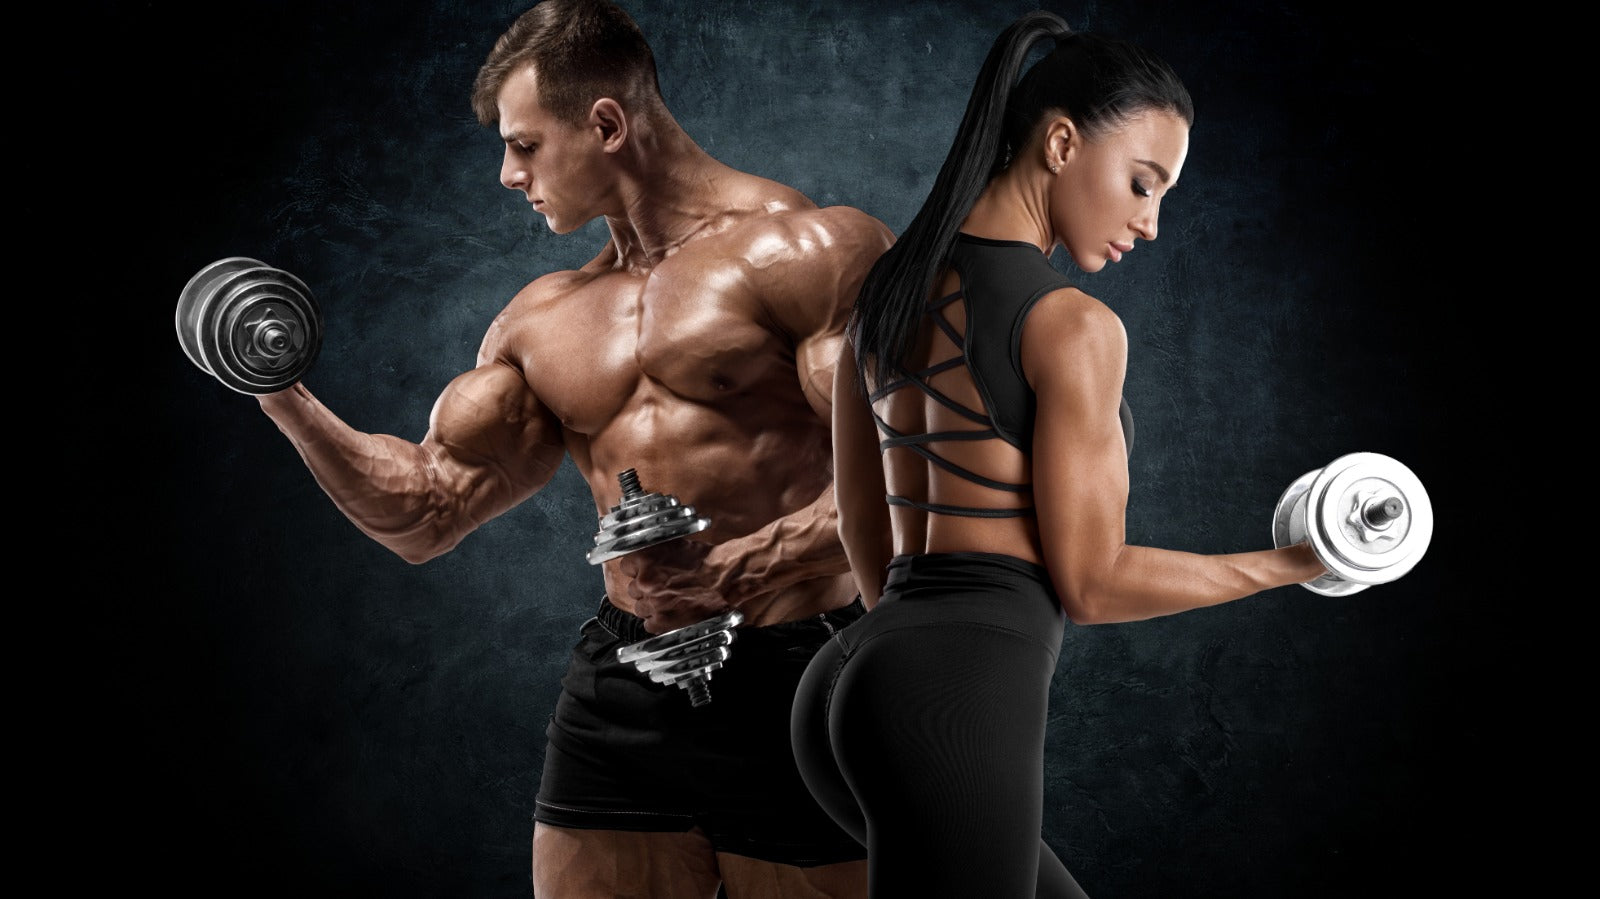 Men-woman-workout-holding-dumbell-muscle